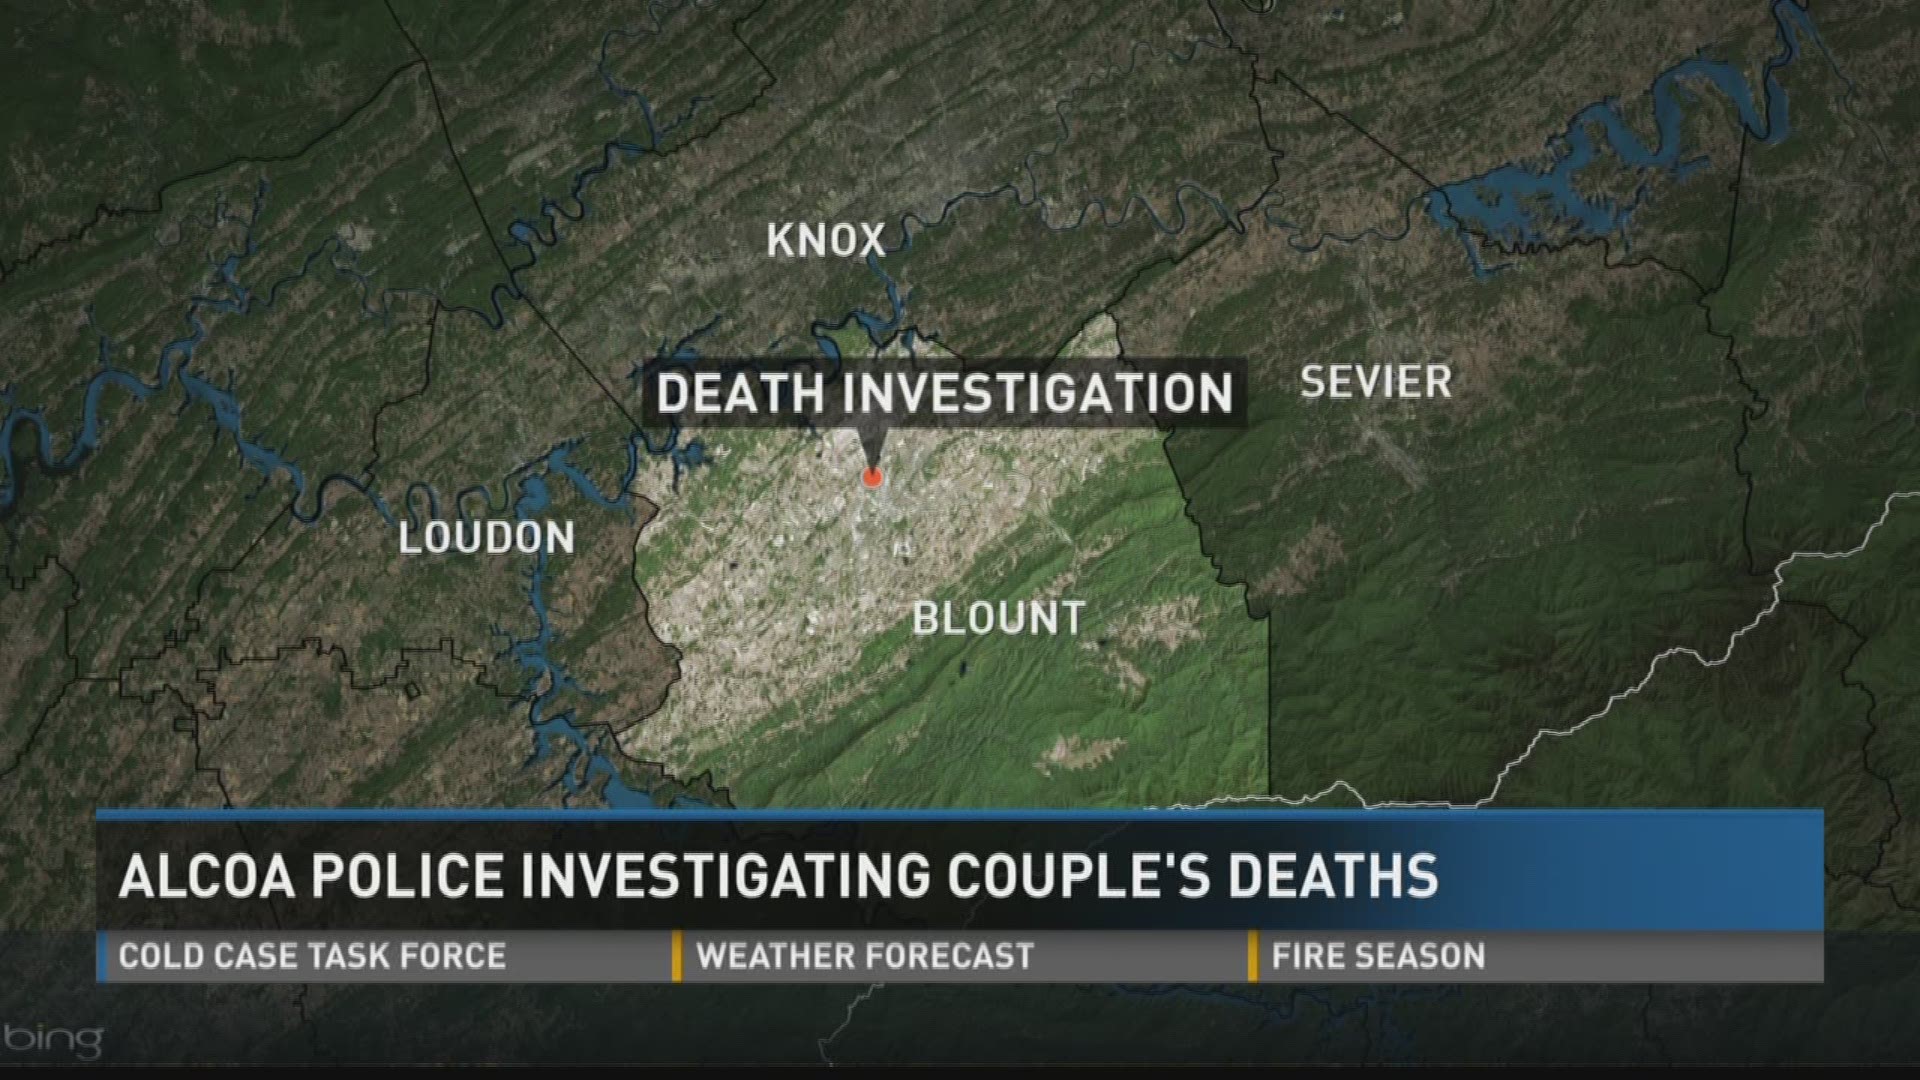 Feb. 15, 2017: Police are investigating after they discovered two people dead in their Alcoa home.